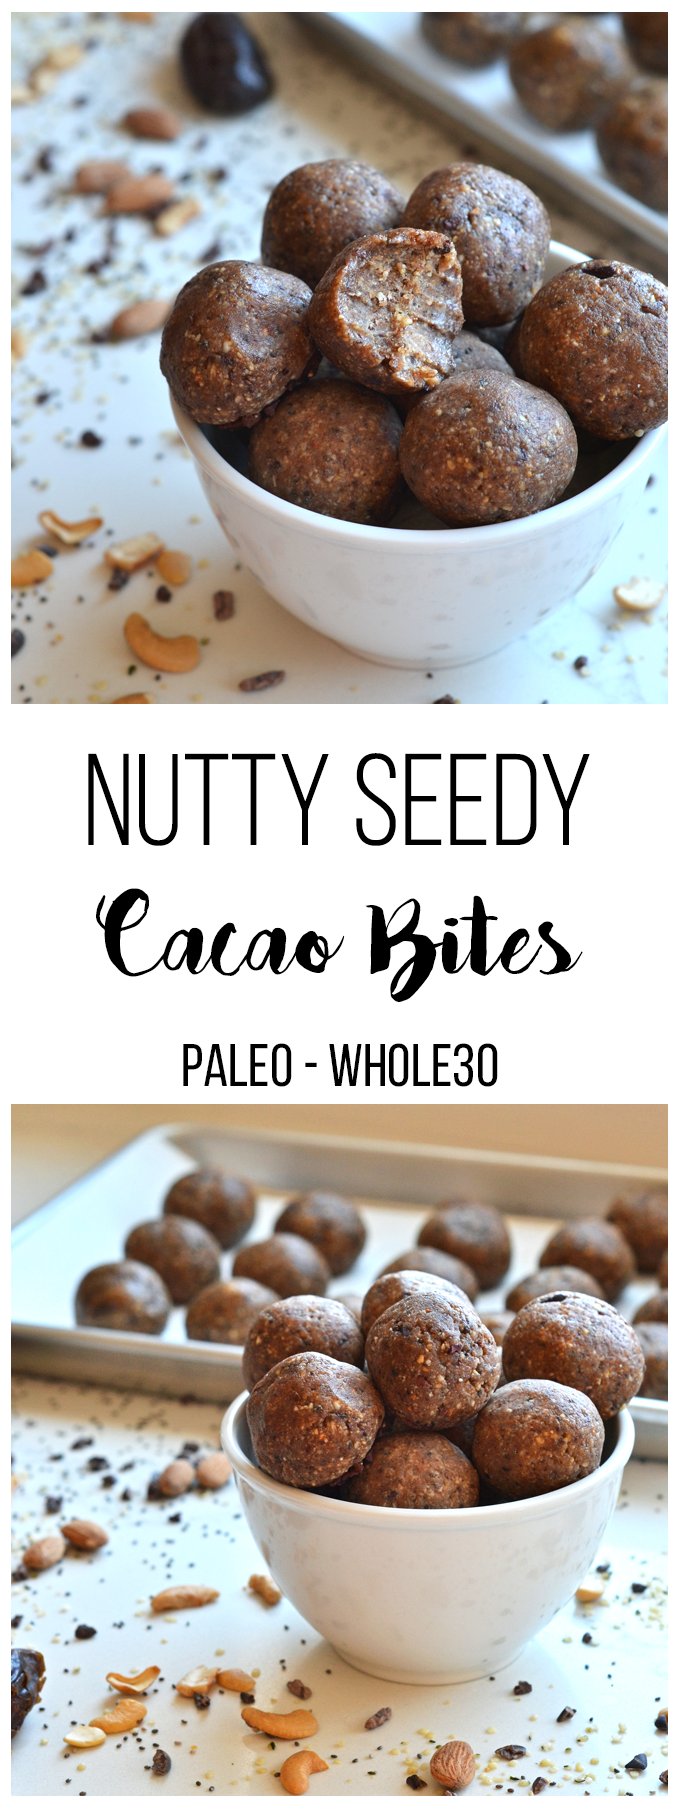 These Nutty Seedy Cacao Bites are packed with nutrients and healthy fats to keep you energized on your Whole30 or just in your healthy lifestyle!